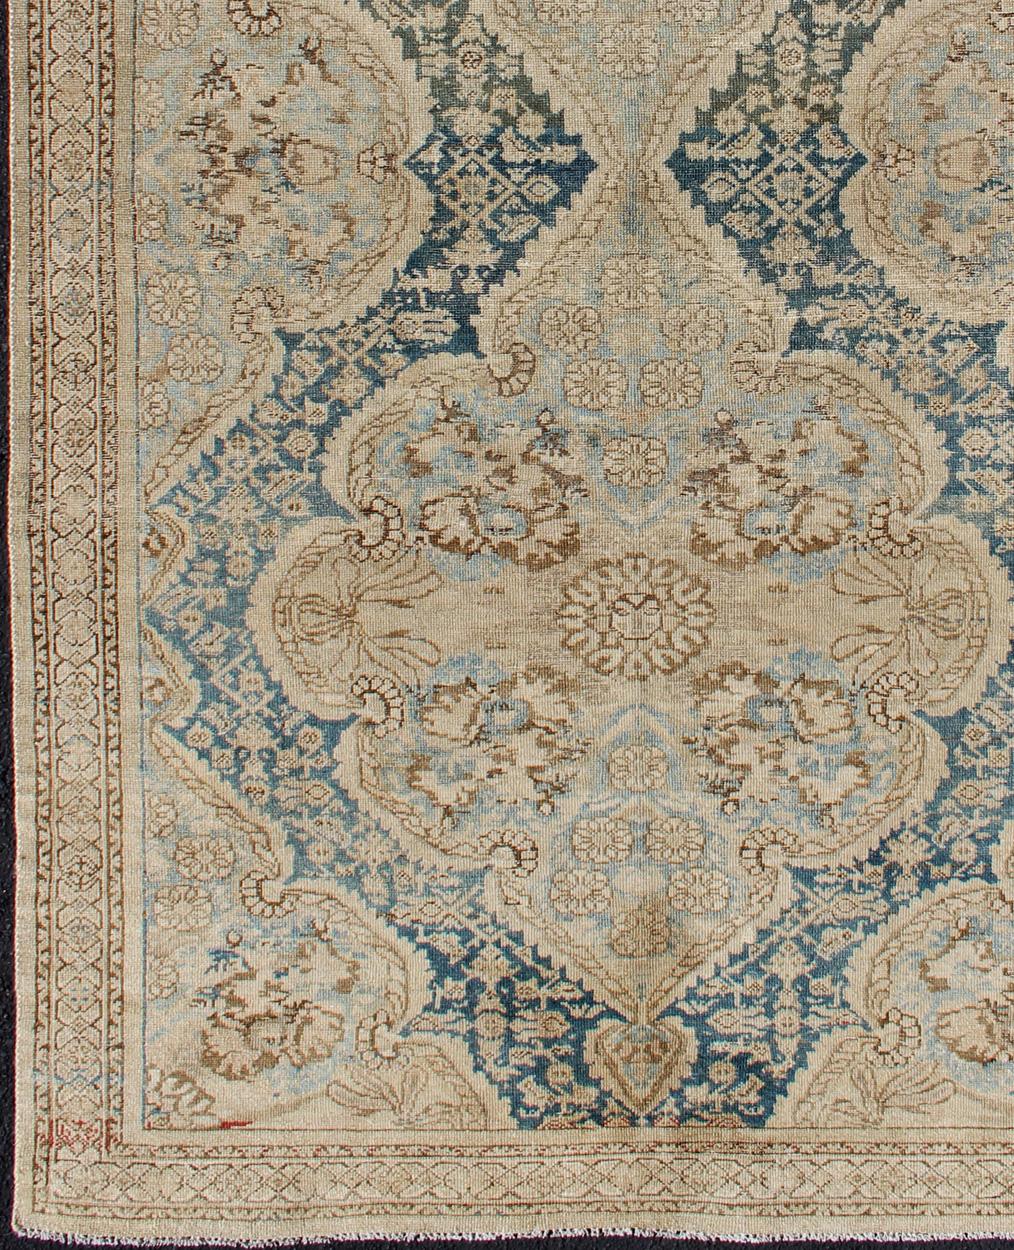     Malayer Antique short Gallery Rug from Persia with Botanical Medallion Design in nude and blue colors, rug 19-0102, country of origin / type: Iran / Serab, circa 1900.

This handwoven, antique Persian Serab rug features a central field imbued